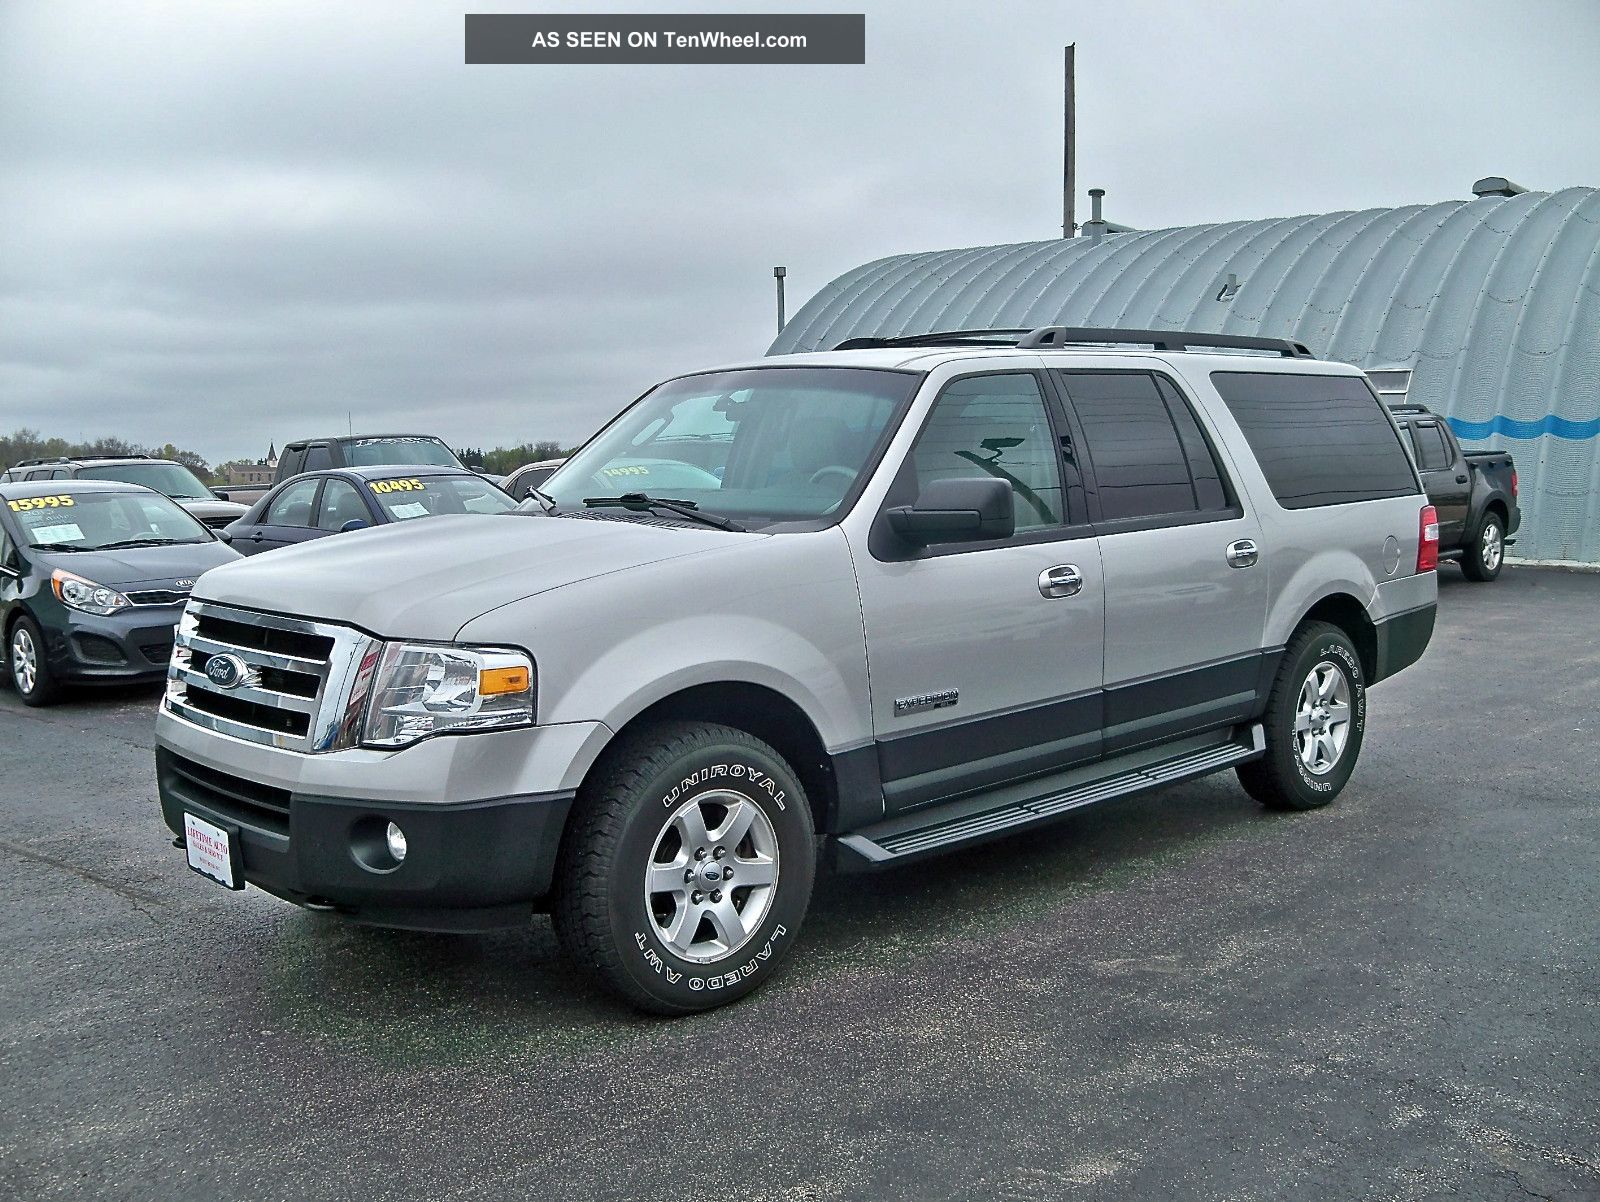 2007 Ford expedition xlt options #7